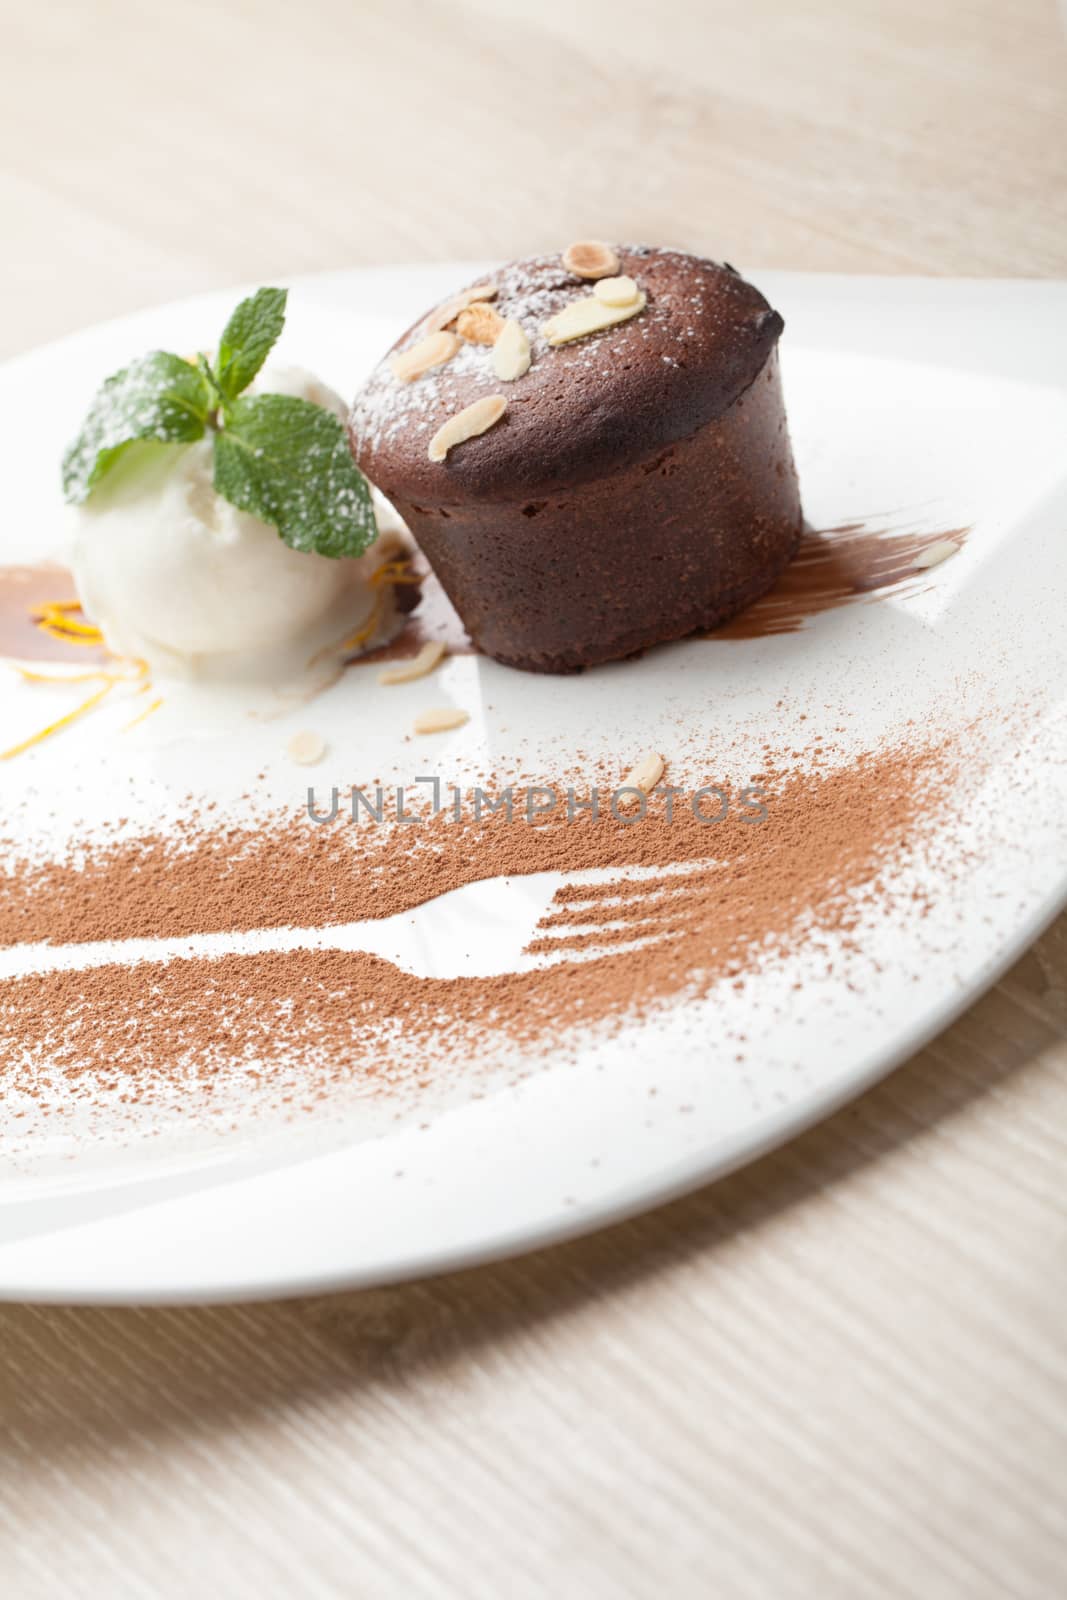 Warm dessert chocolate cake Fondant served on plate with ice-cream ball, almond chips, mint, icing, citron, cacao